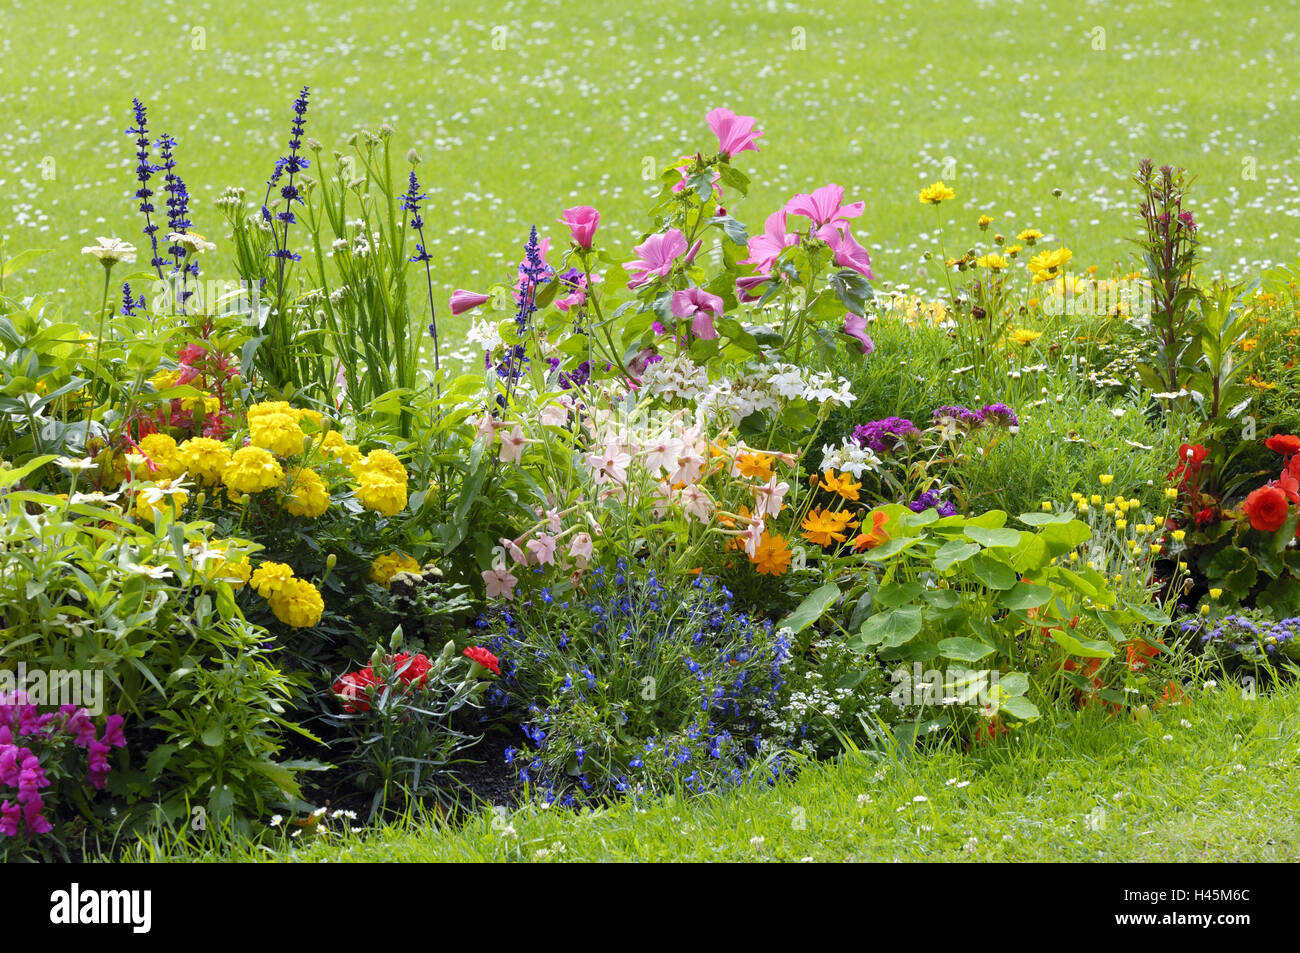 Summer flowers, blossom, blossoms, flowers, brightly, colours, colorfully, garden, garden, patch, flowerbed, garden flowers, park, park, plants, flora, many, passed away, lawn, daisy, Stock Photo